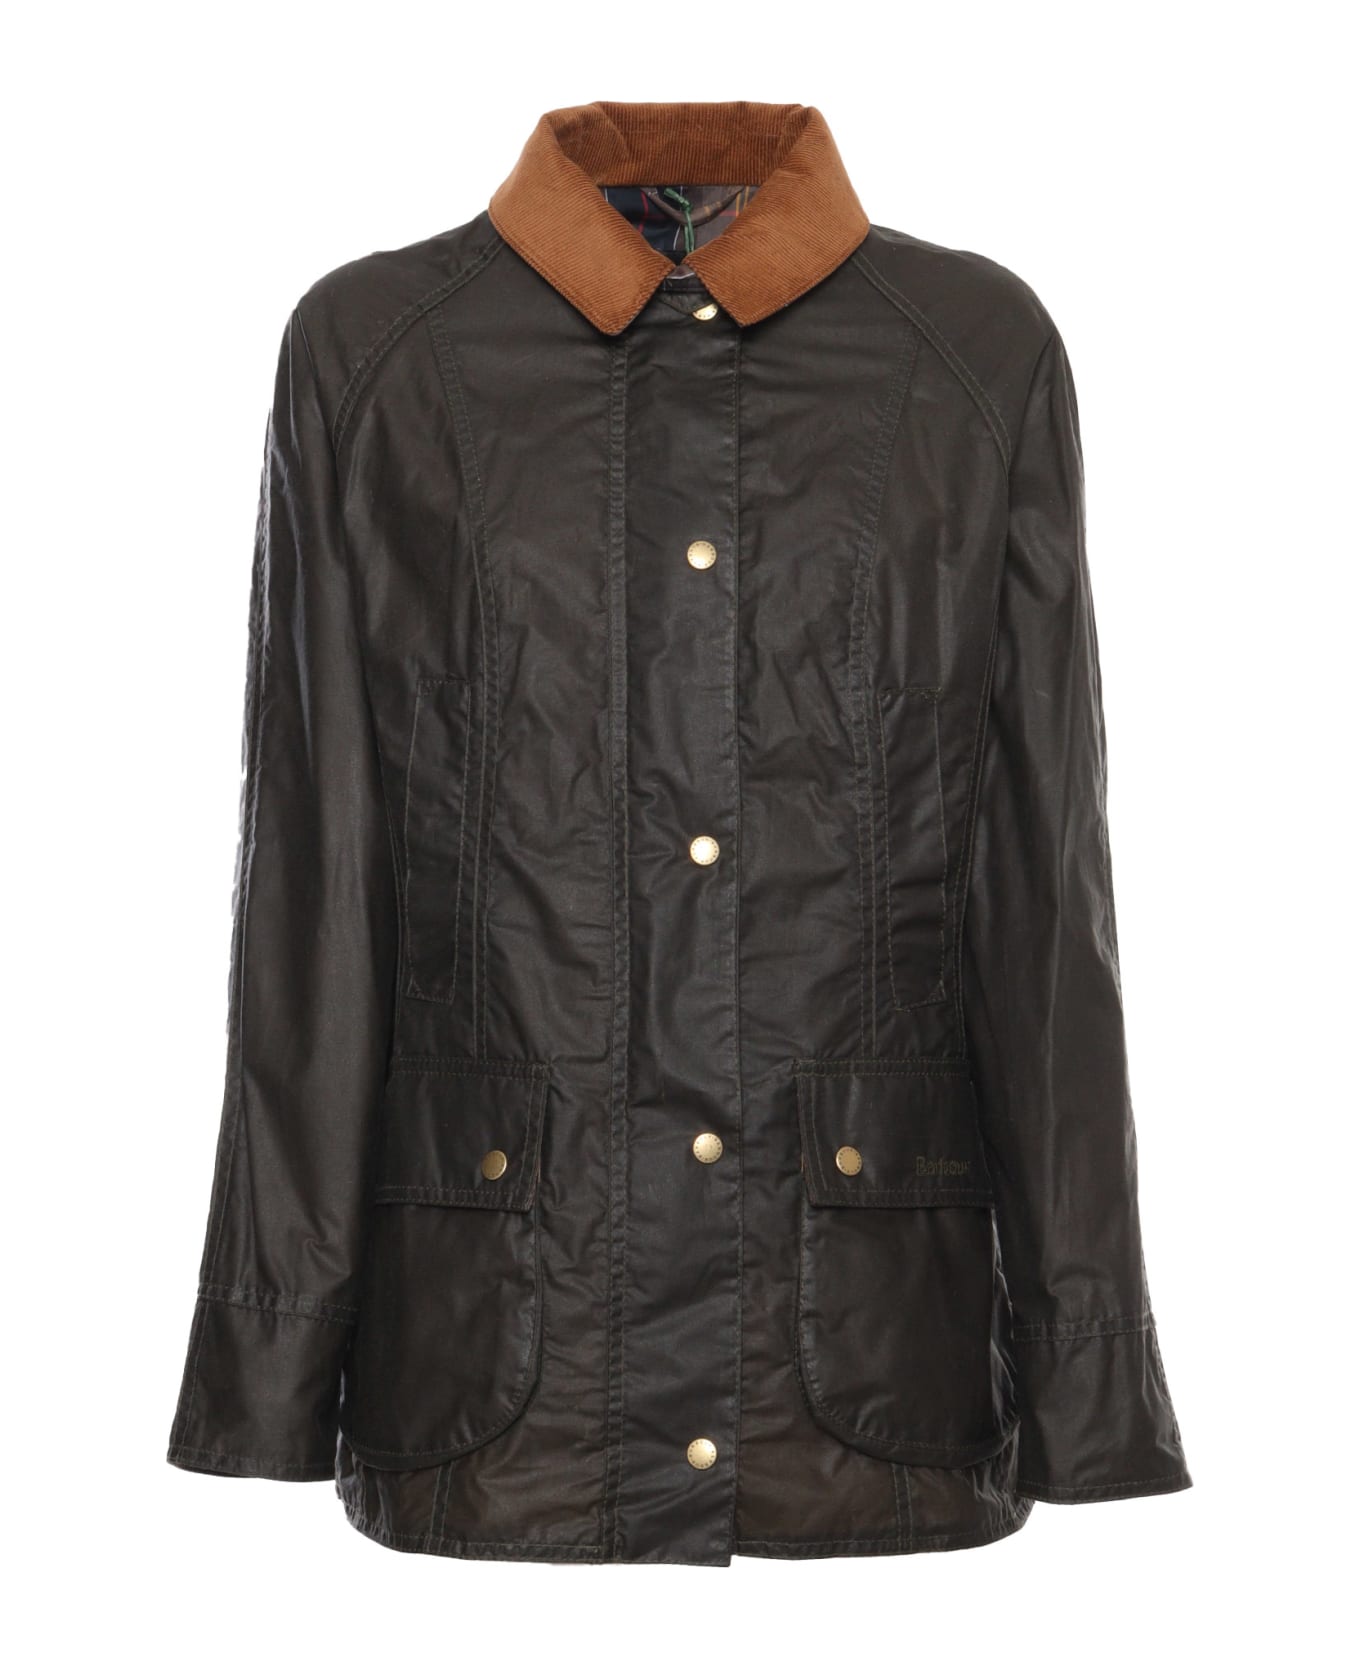 Barbour Beadnell Jacket - Archive Olive ジャケット